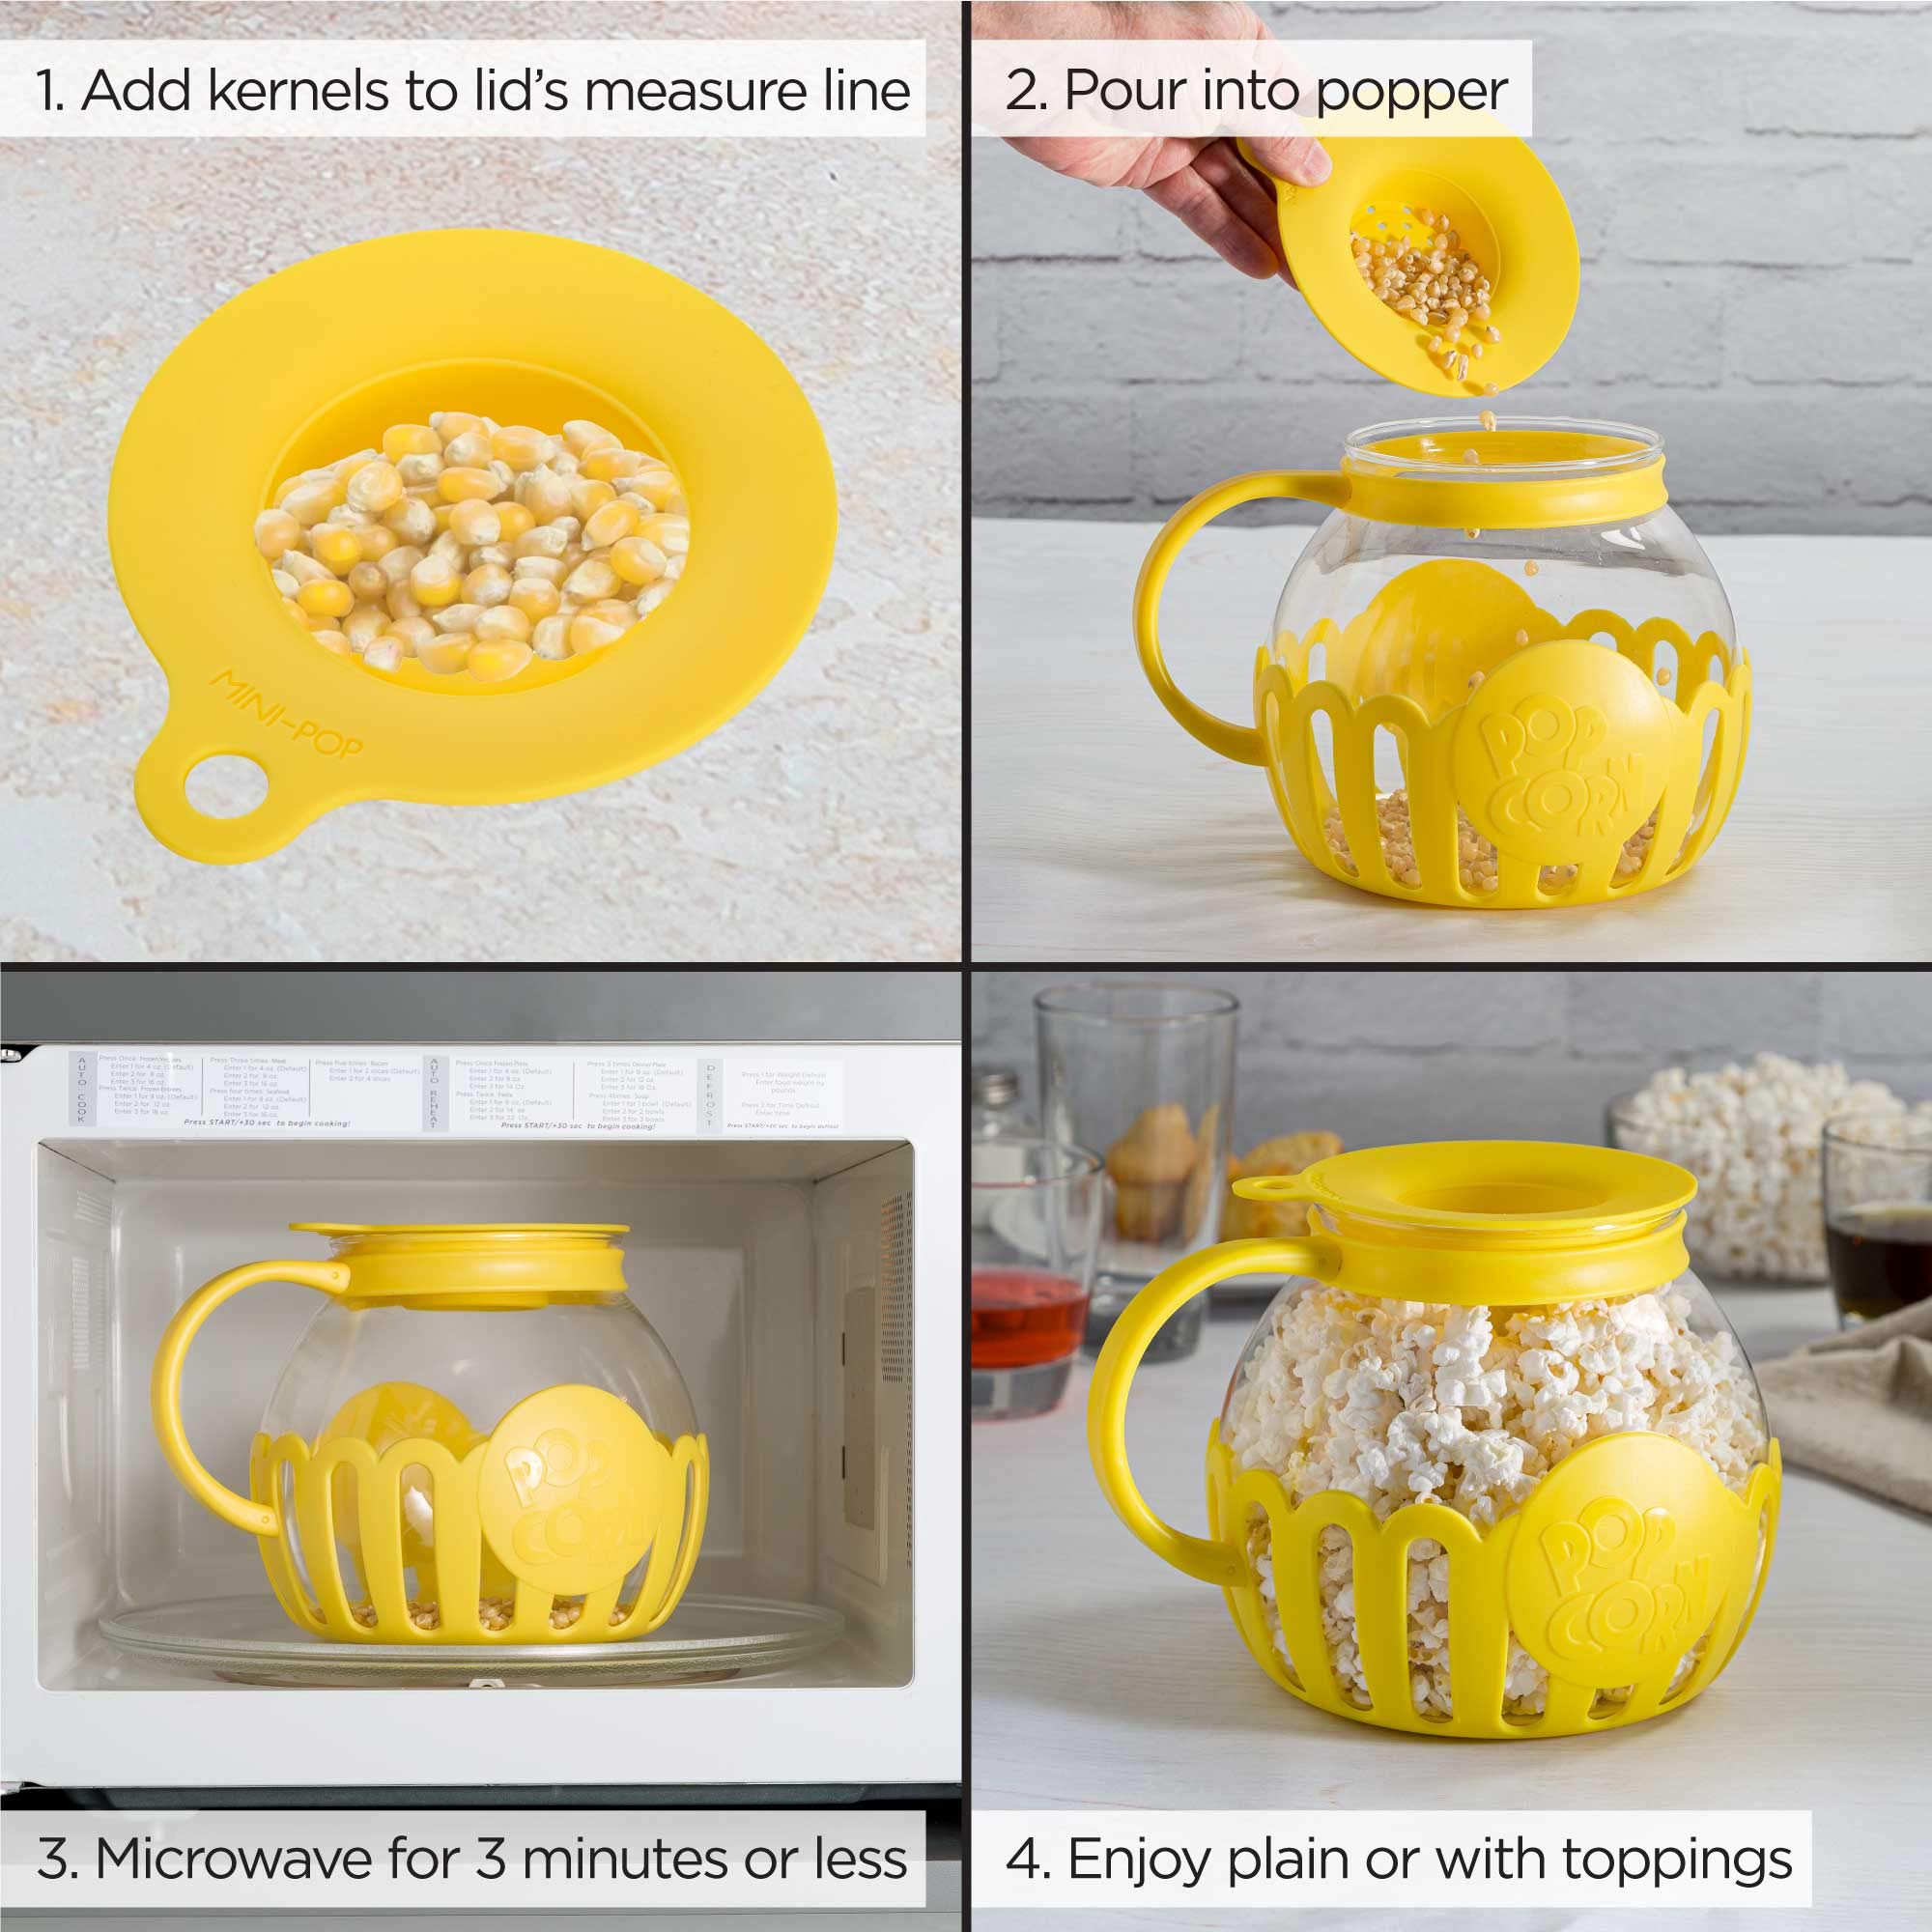 Ecolution Patented Micro-Pop Microwave Popcorn Popper with Temperature Safe Glass, 3-in-1 Lid Measures Kernels and Melts Butter, Made Without BPA, Dishwasher Safe, 3-Quart, Yellow